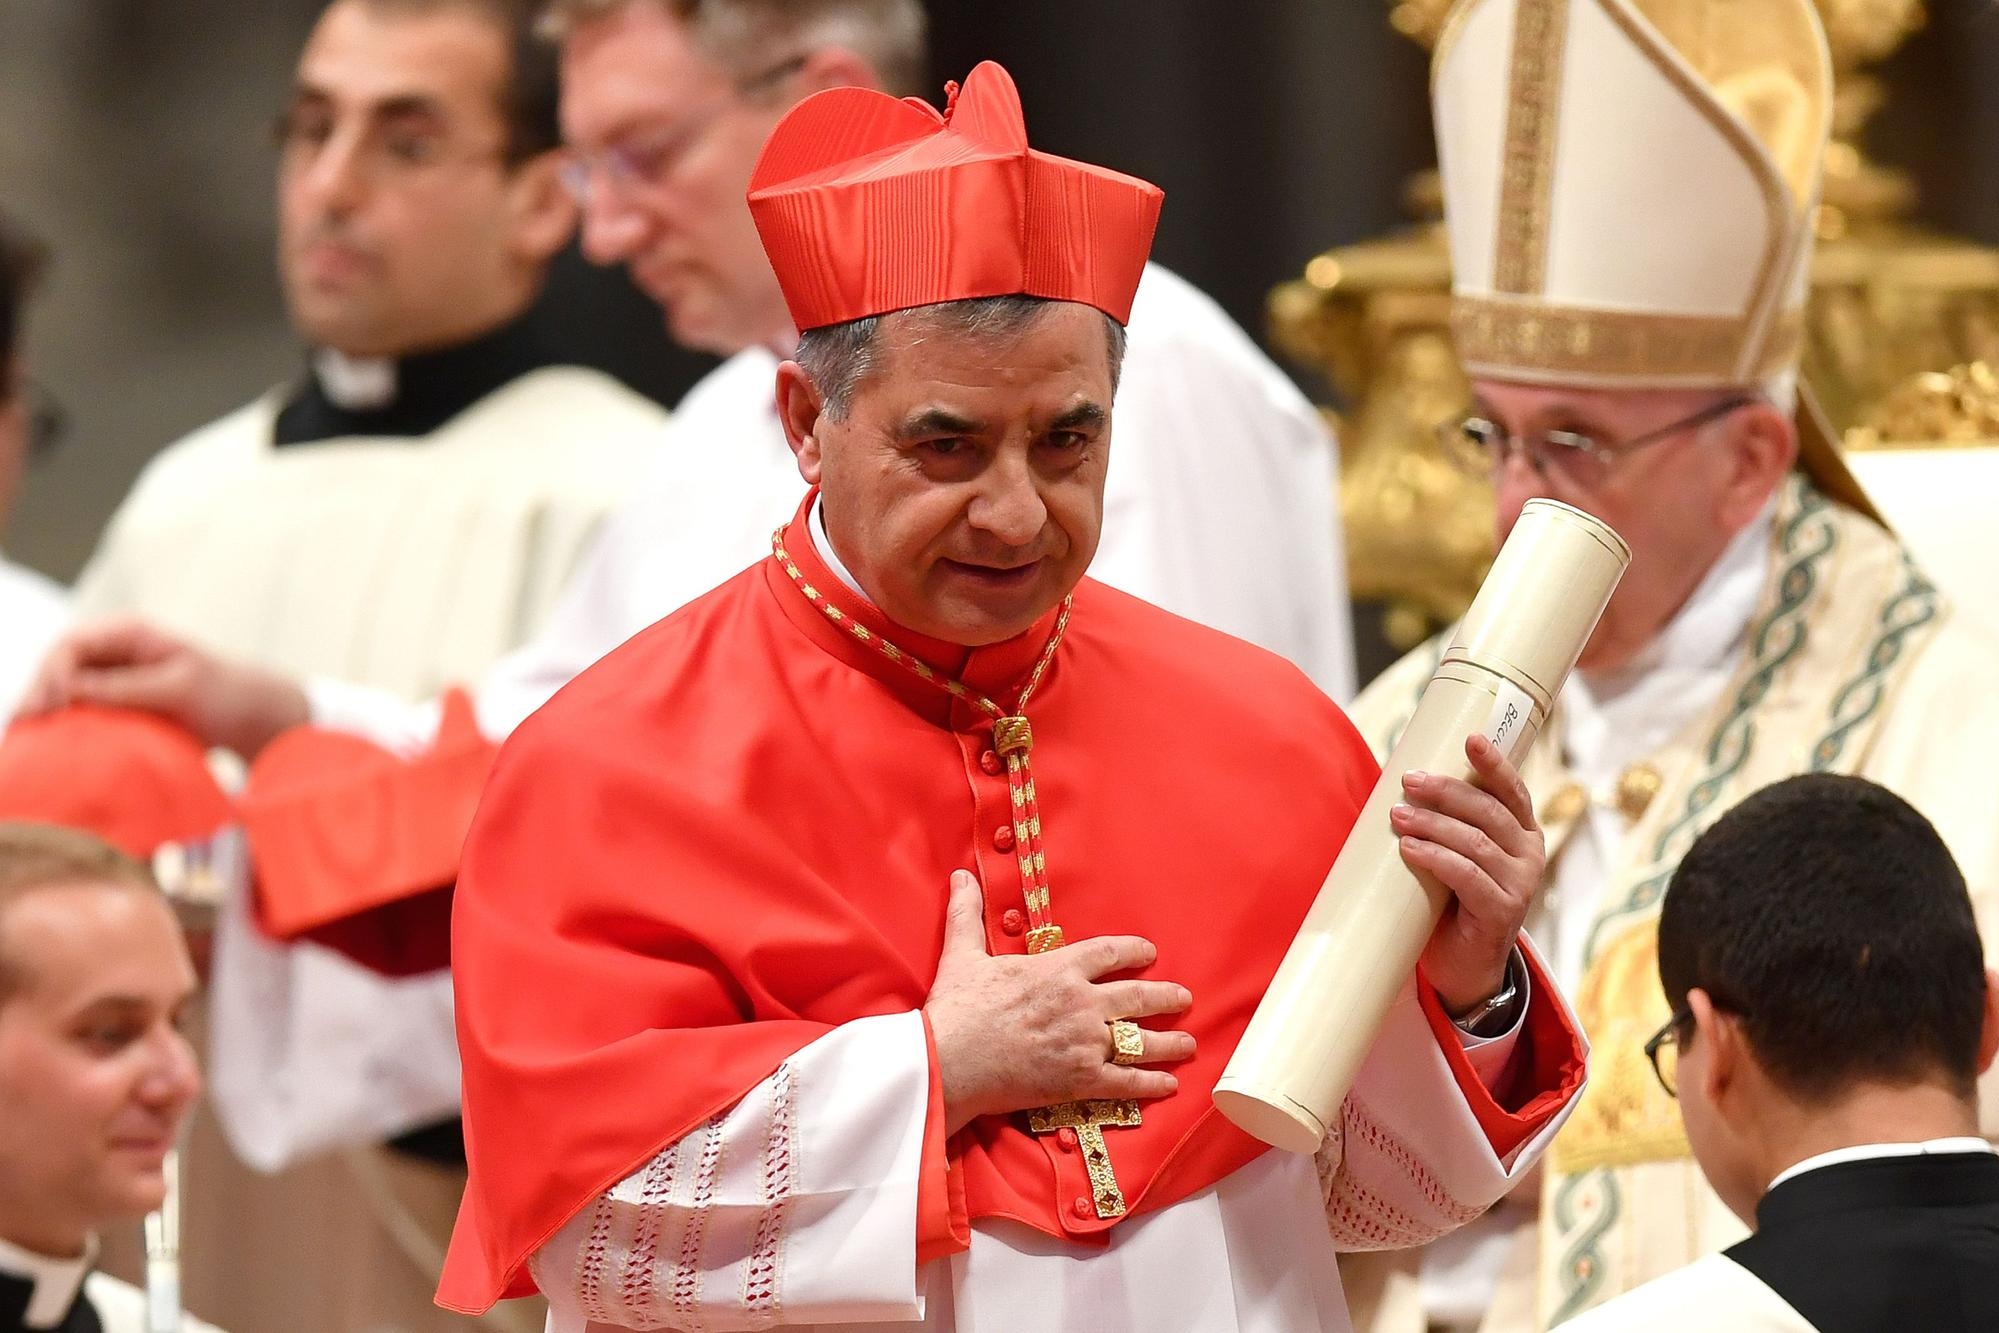 Italian Giovanni Angelo Becciu substitute for General Affairs of the Secretariat of State and special delegate to the Sovereign Military Order of Malta leaves after kneeling before Pope Francis to pledge allegiance and become a cardinal during a consistory for the creation of fourteen new cardinals on June 28, 2018 at St Peter's basilica in Vatican. / AFP PHOTO / Andreas SOLARO